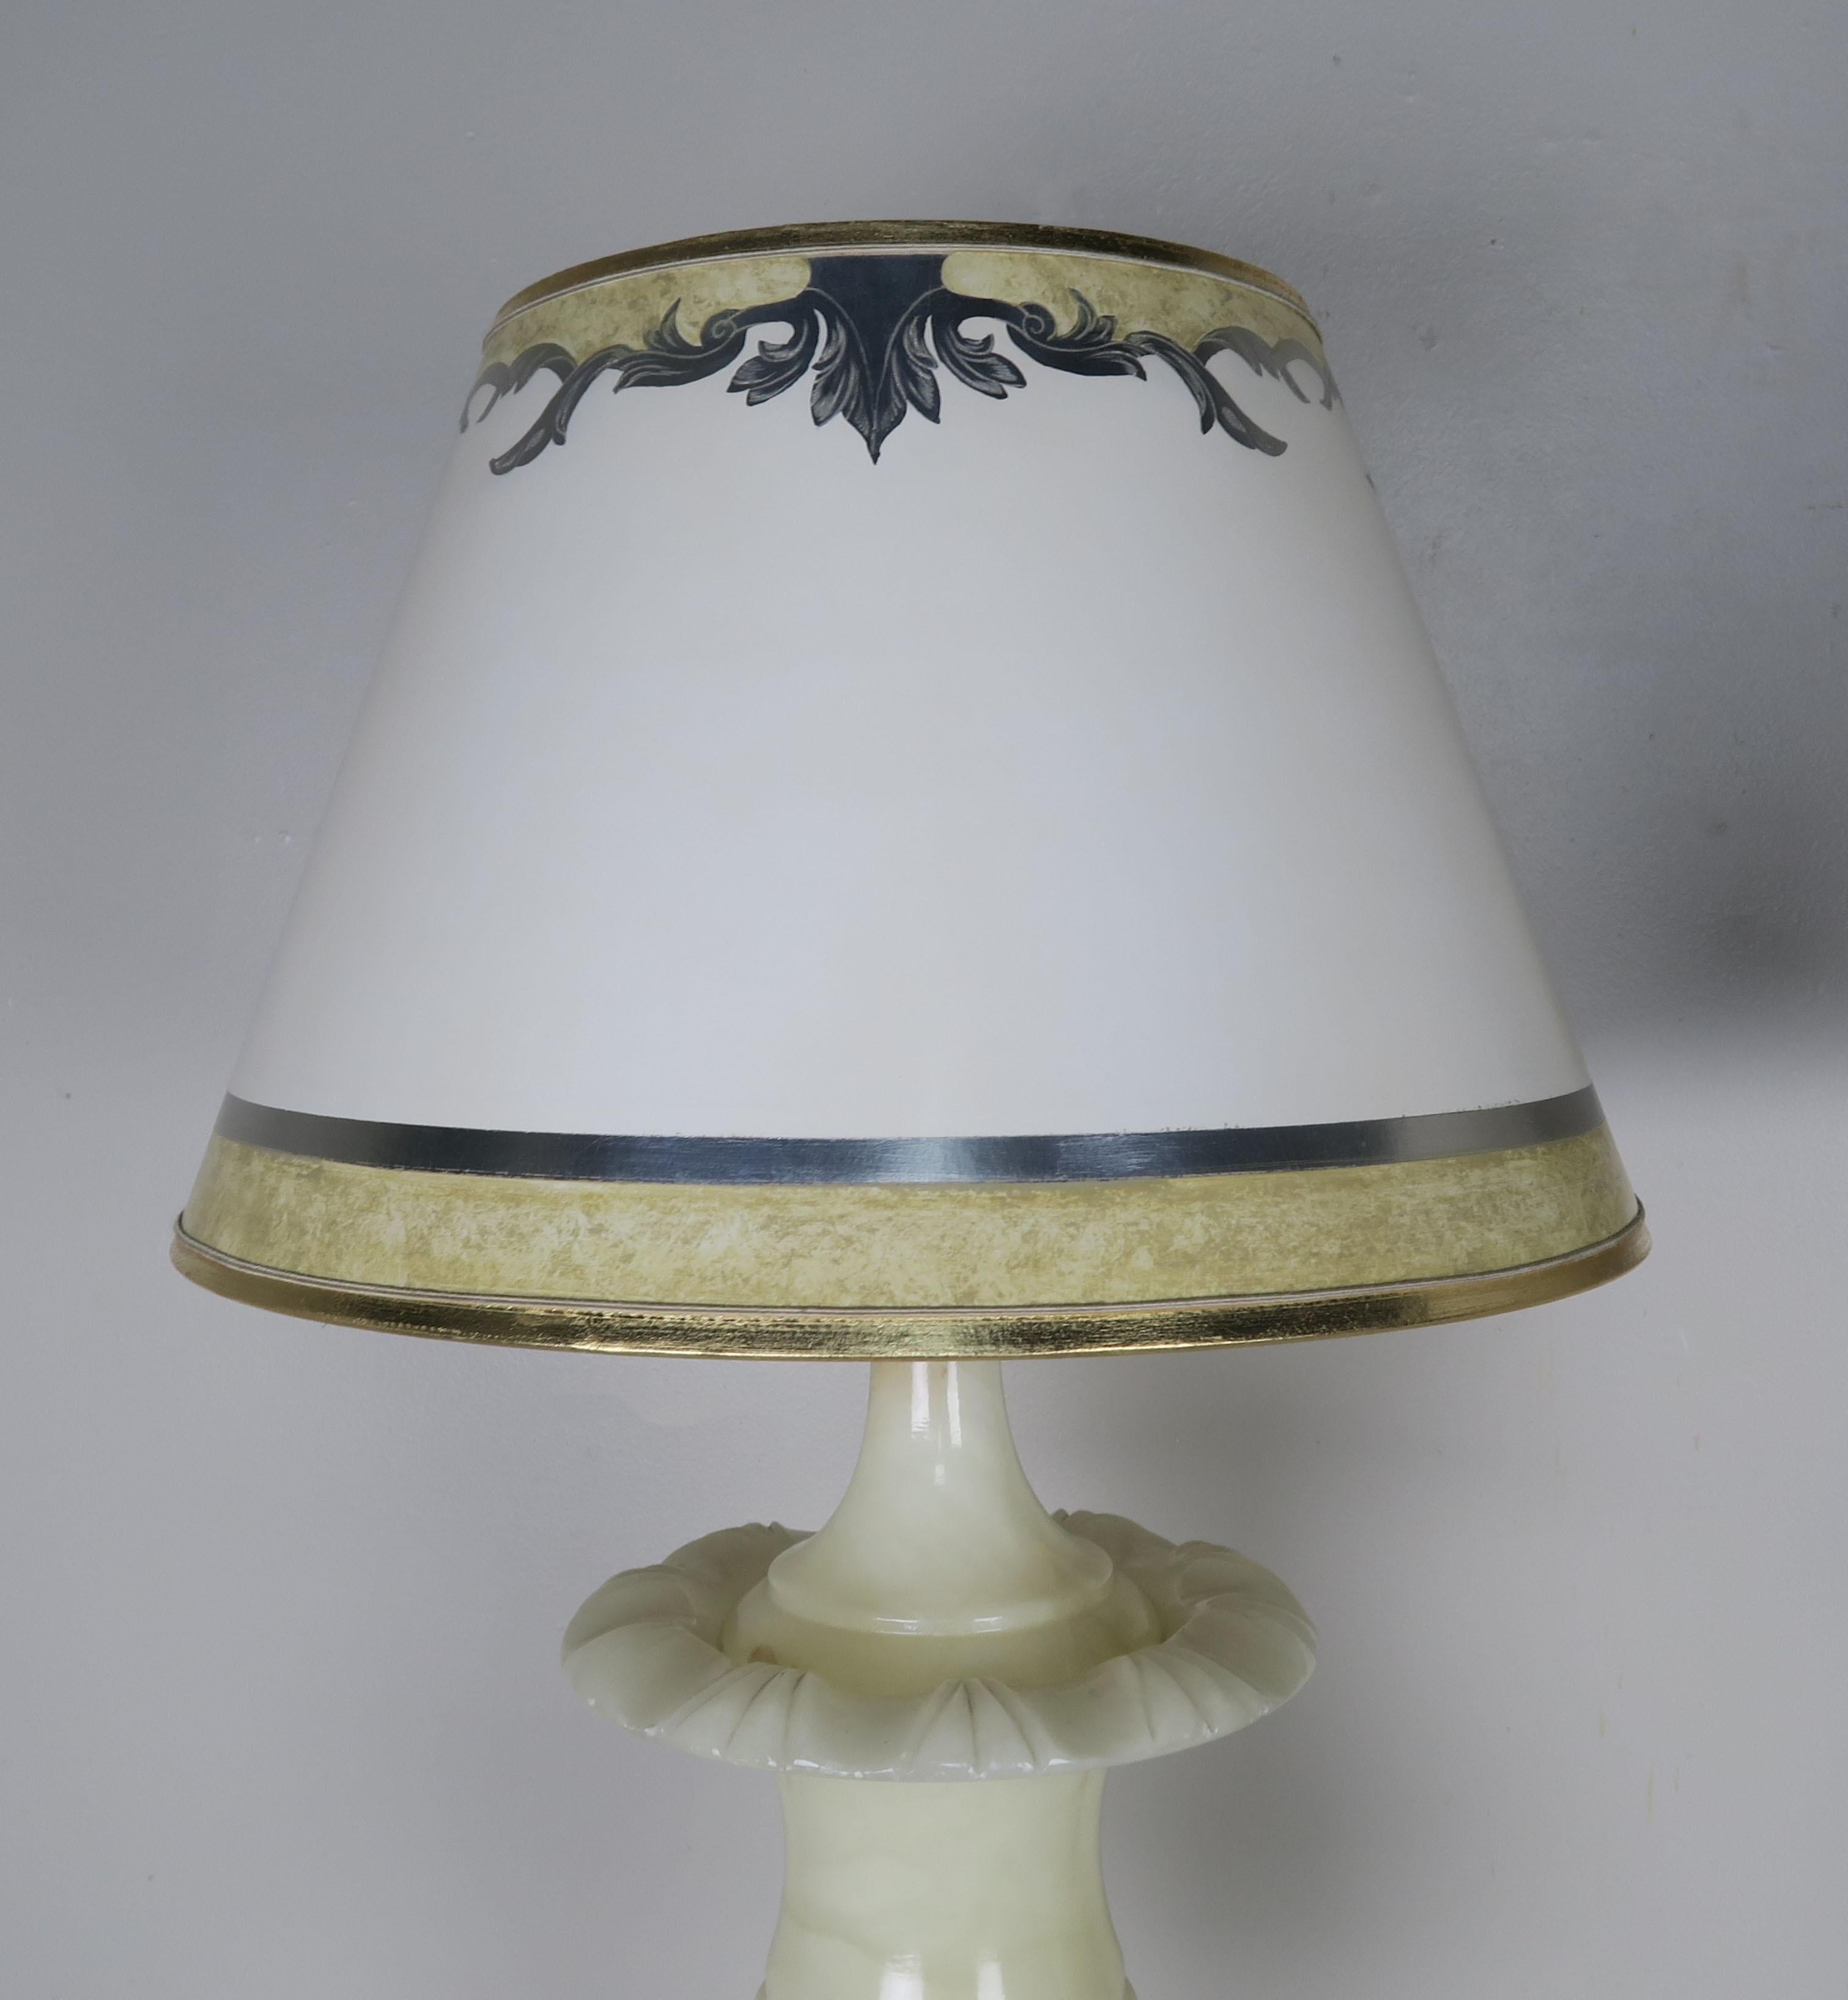 Cream alabaster urn shaped lamps with hand painted parchment shades. The lamps have been newly rewired and crowned with custom hand painted parchment shades.